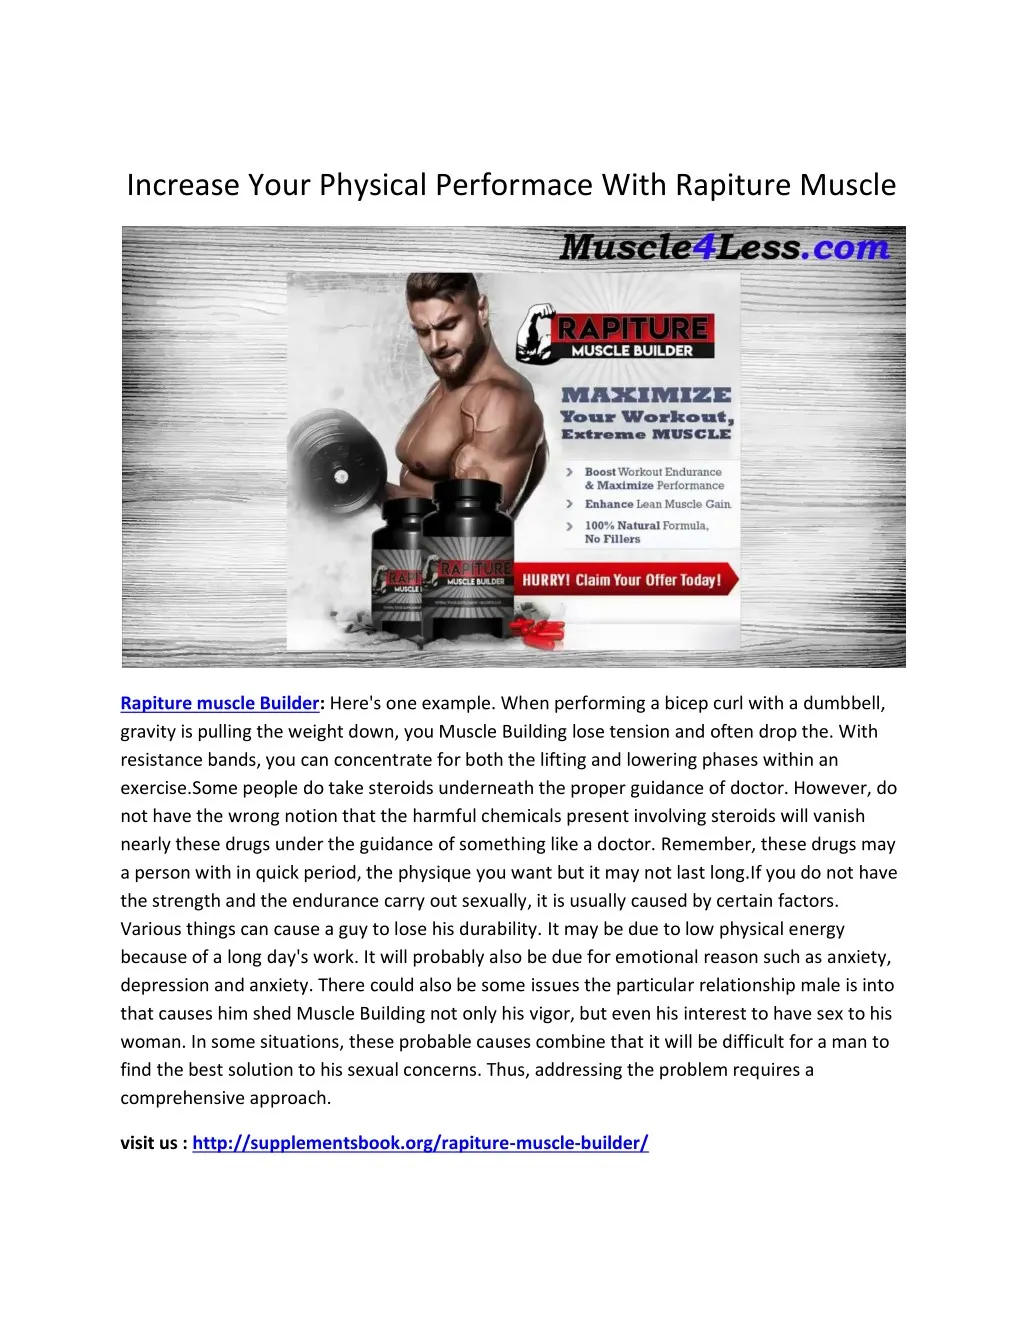 increase your physical performace with rapiture